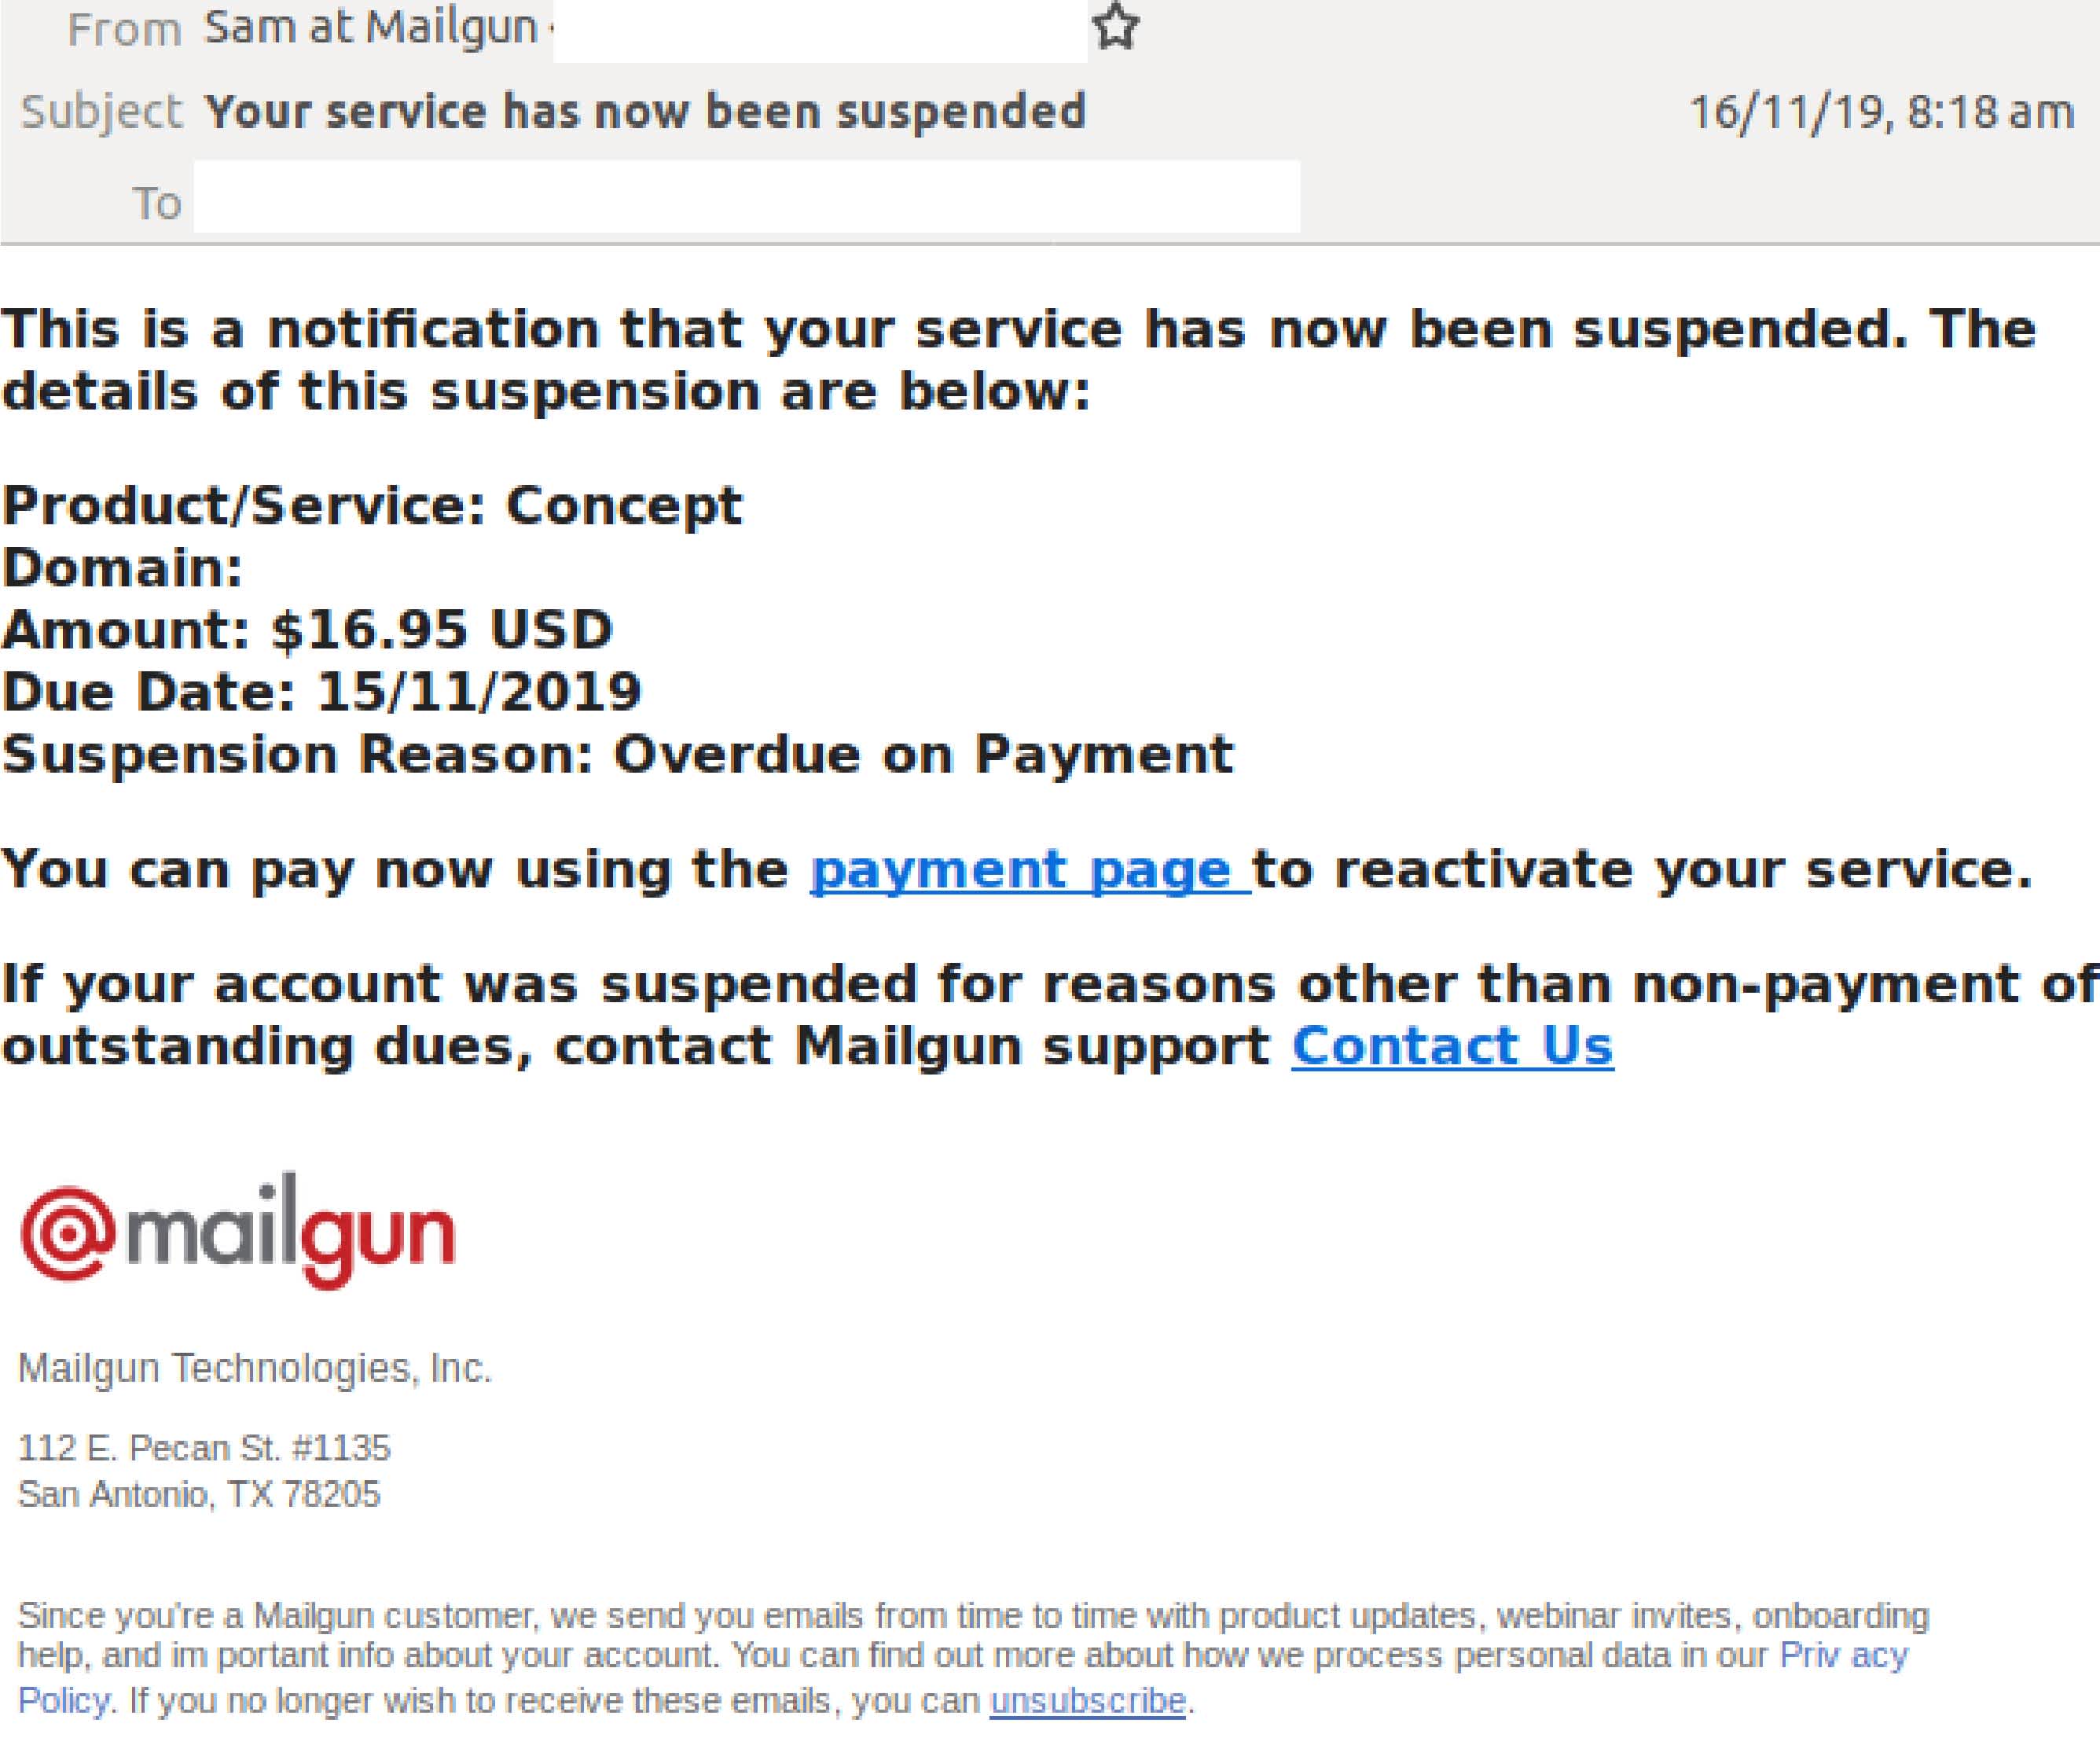 A screenshot of an email showing a phishing attempt from someone pretending to be the Mailgun Renewal Team.